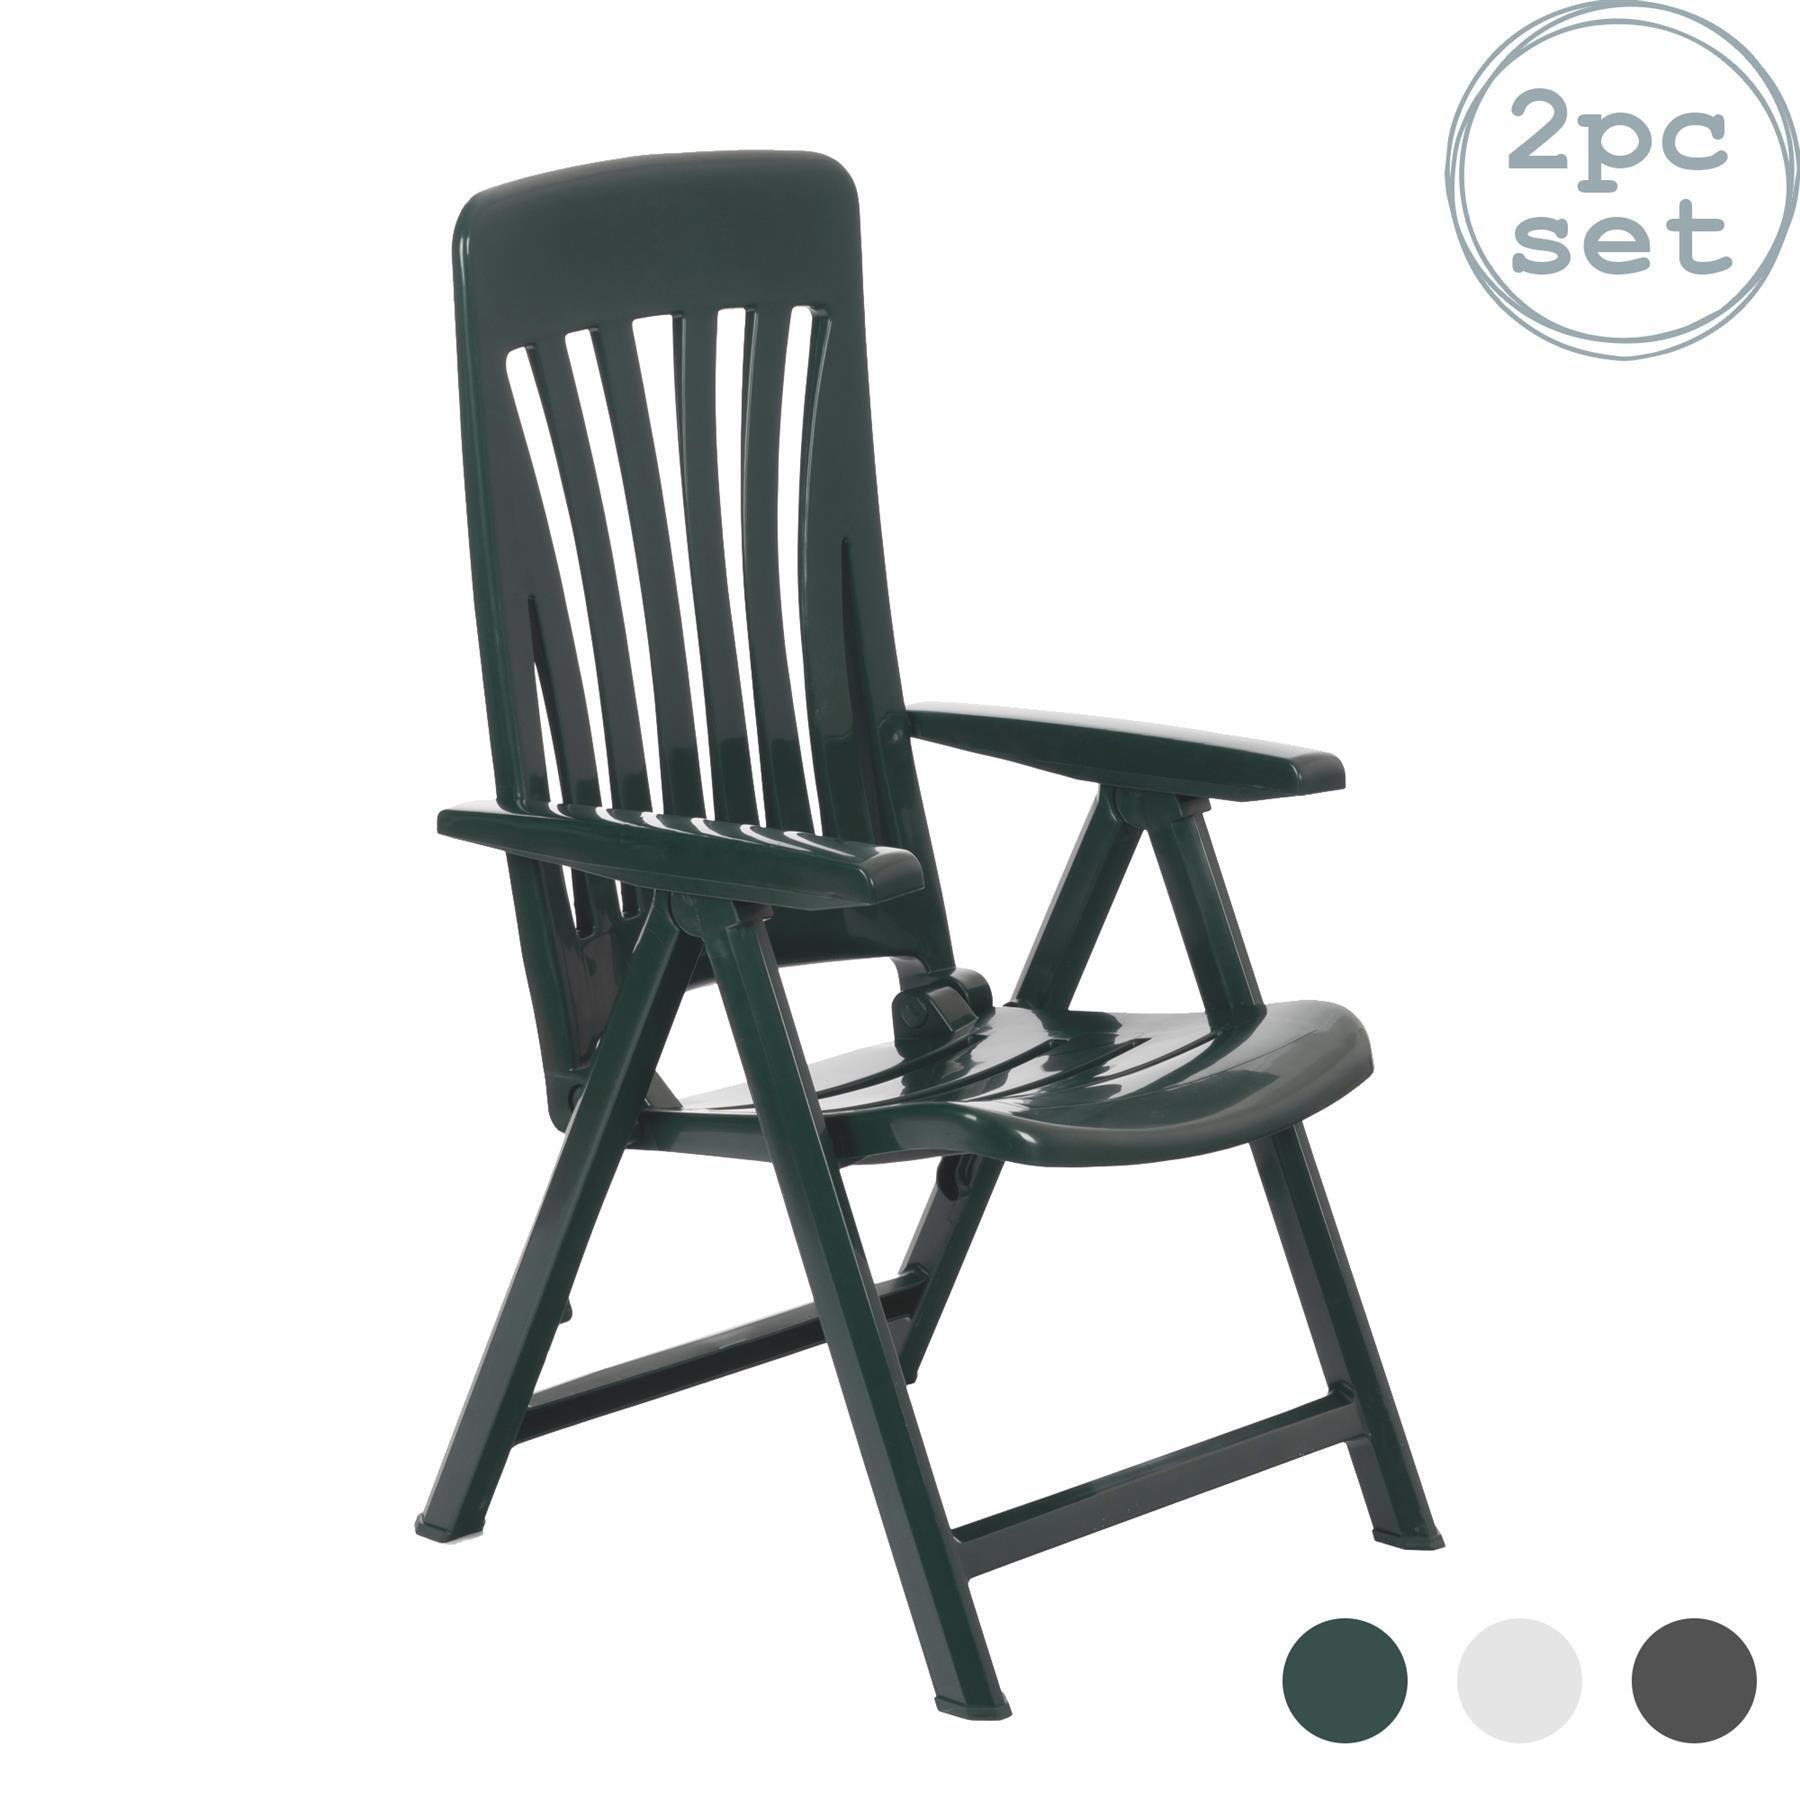 Blanes Reclining Garden Chairs Pack of 2 - image 1